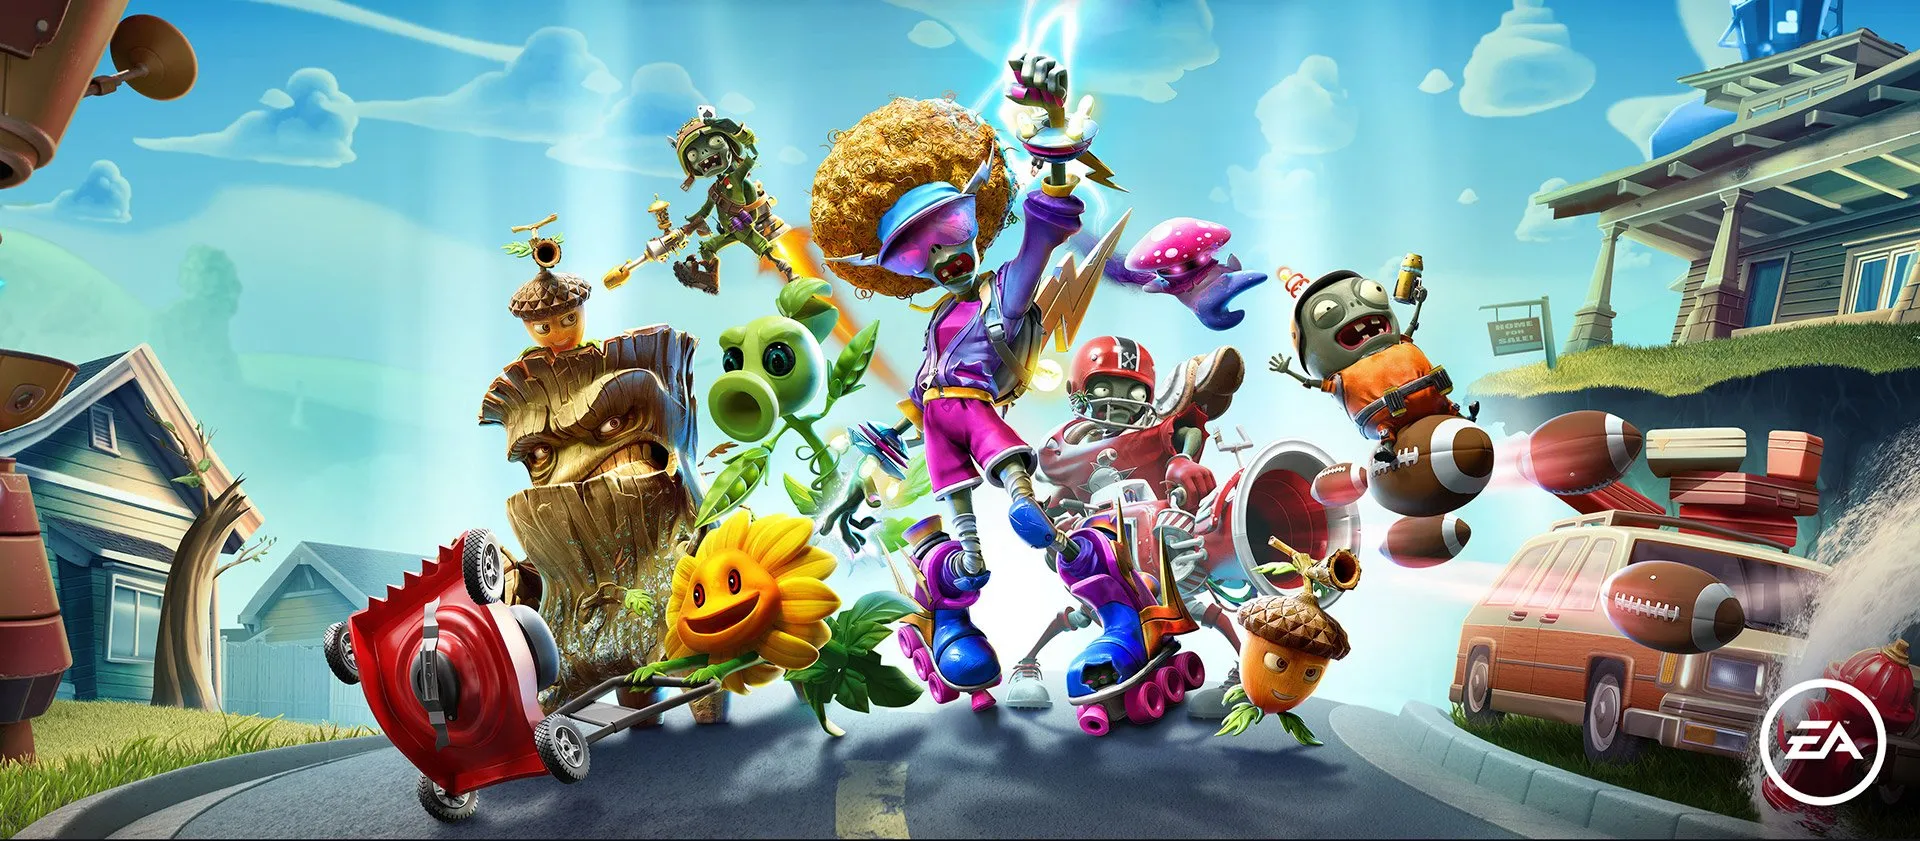 Plants vs. Zombies: Battle for Neighborville review — Needs more time to  grow